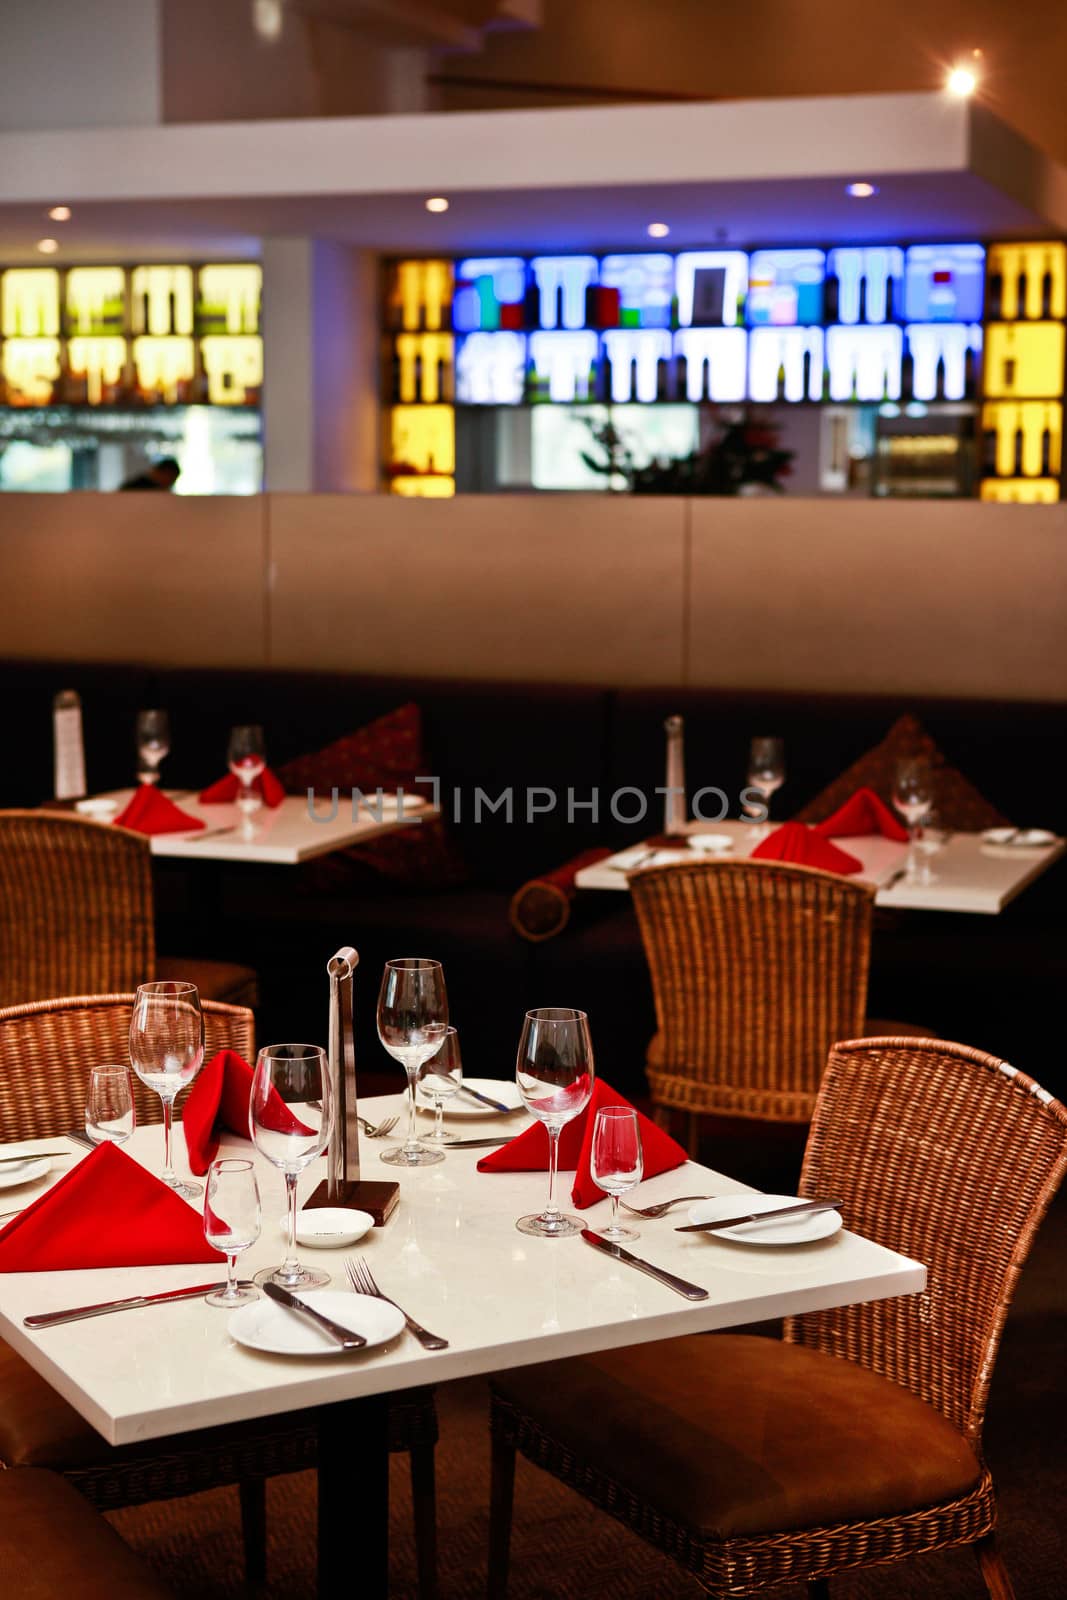 Restaurant interior with a bright wall display and comfortable wicker chairs around formal set tables